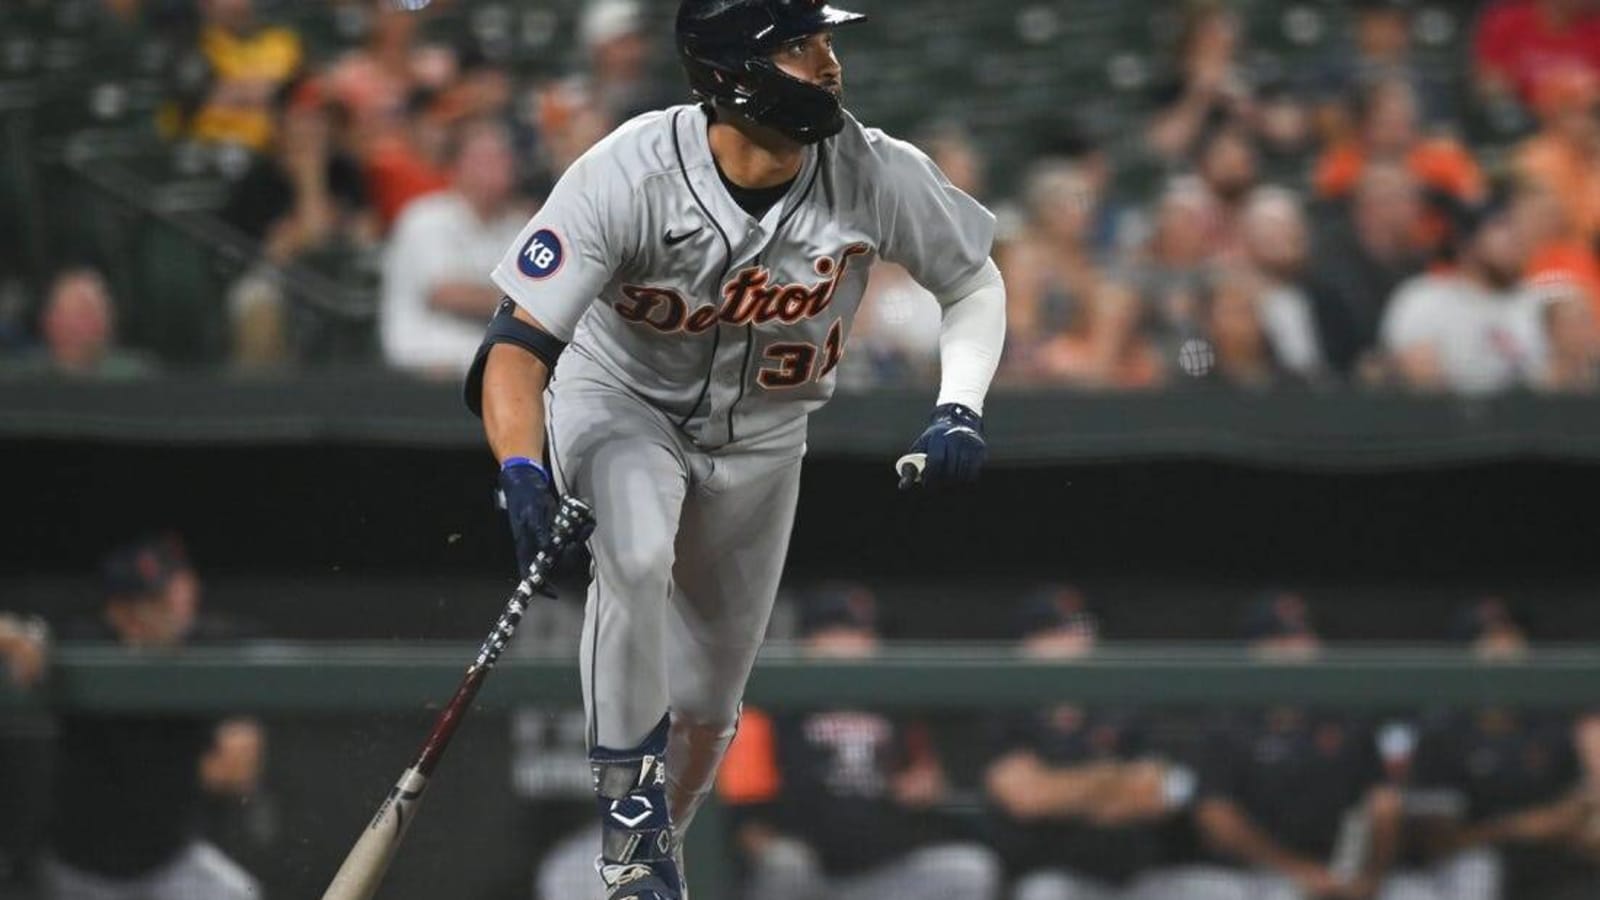 Kansas City Royals vs. Detroit Tigers prediction, pick, odds: Out of playoffs, but building momentum